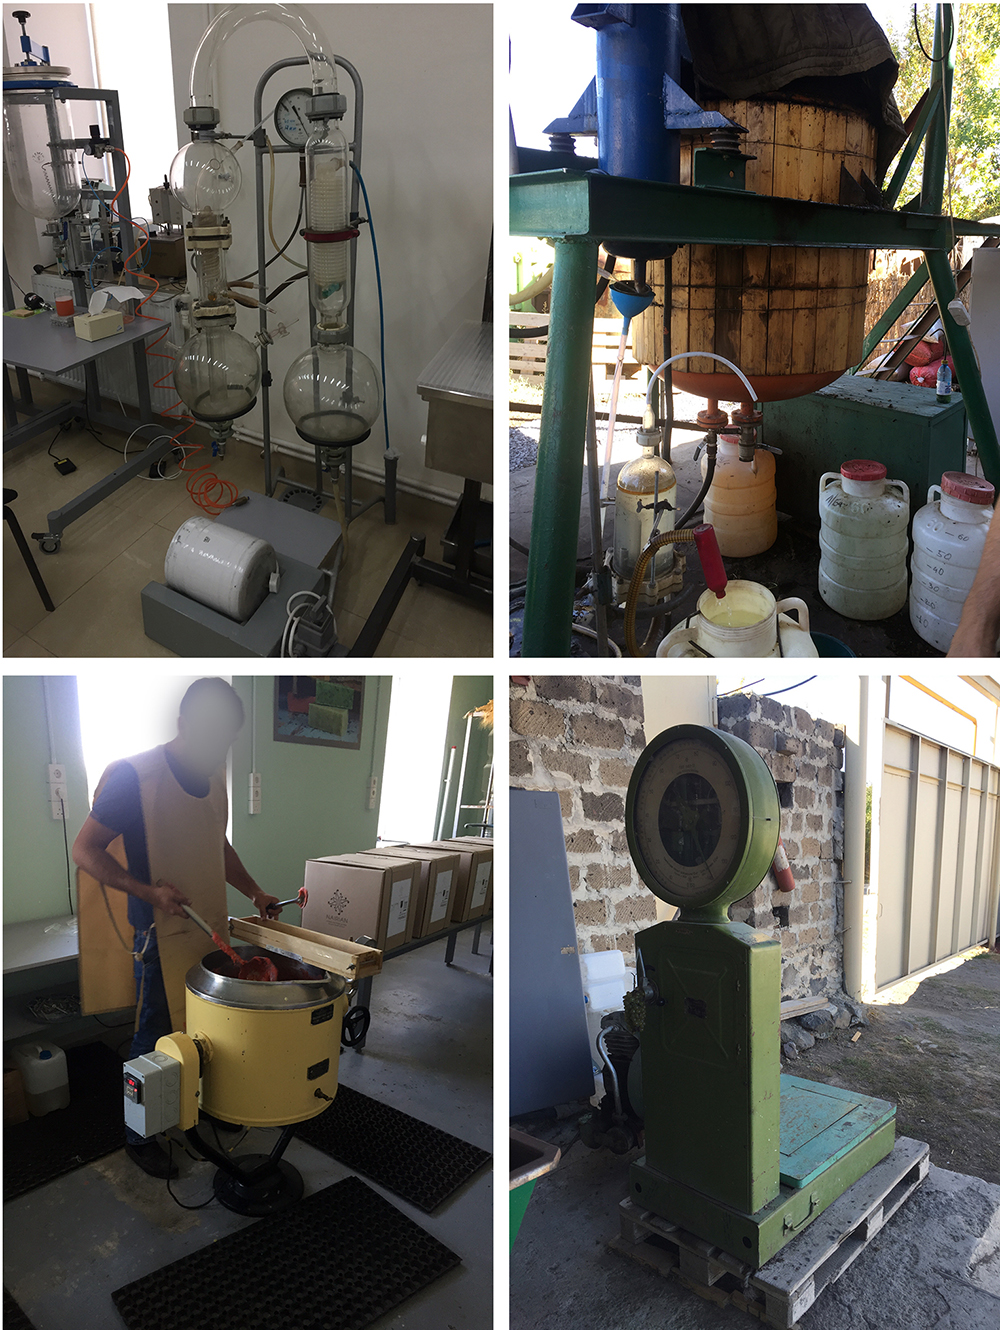 Refitted and upcycled equipment from Khimzavod at the Nairian factory: distillery from old flasks (top left); distillery from old autoclave (top right); cauldron used for saponification (bottom left); Soviet vintage scale to weigh plants (bottom right). Photos by Lori Khatchadourian.